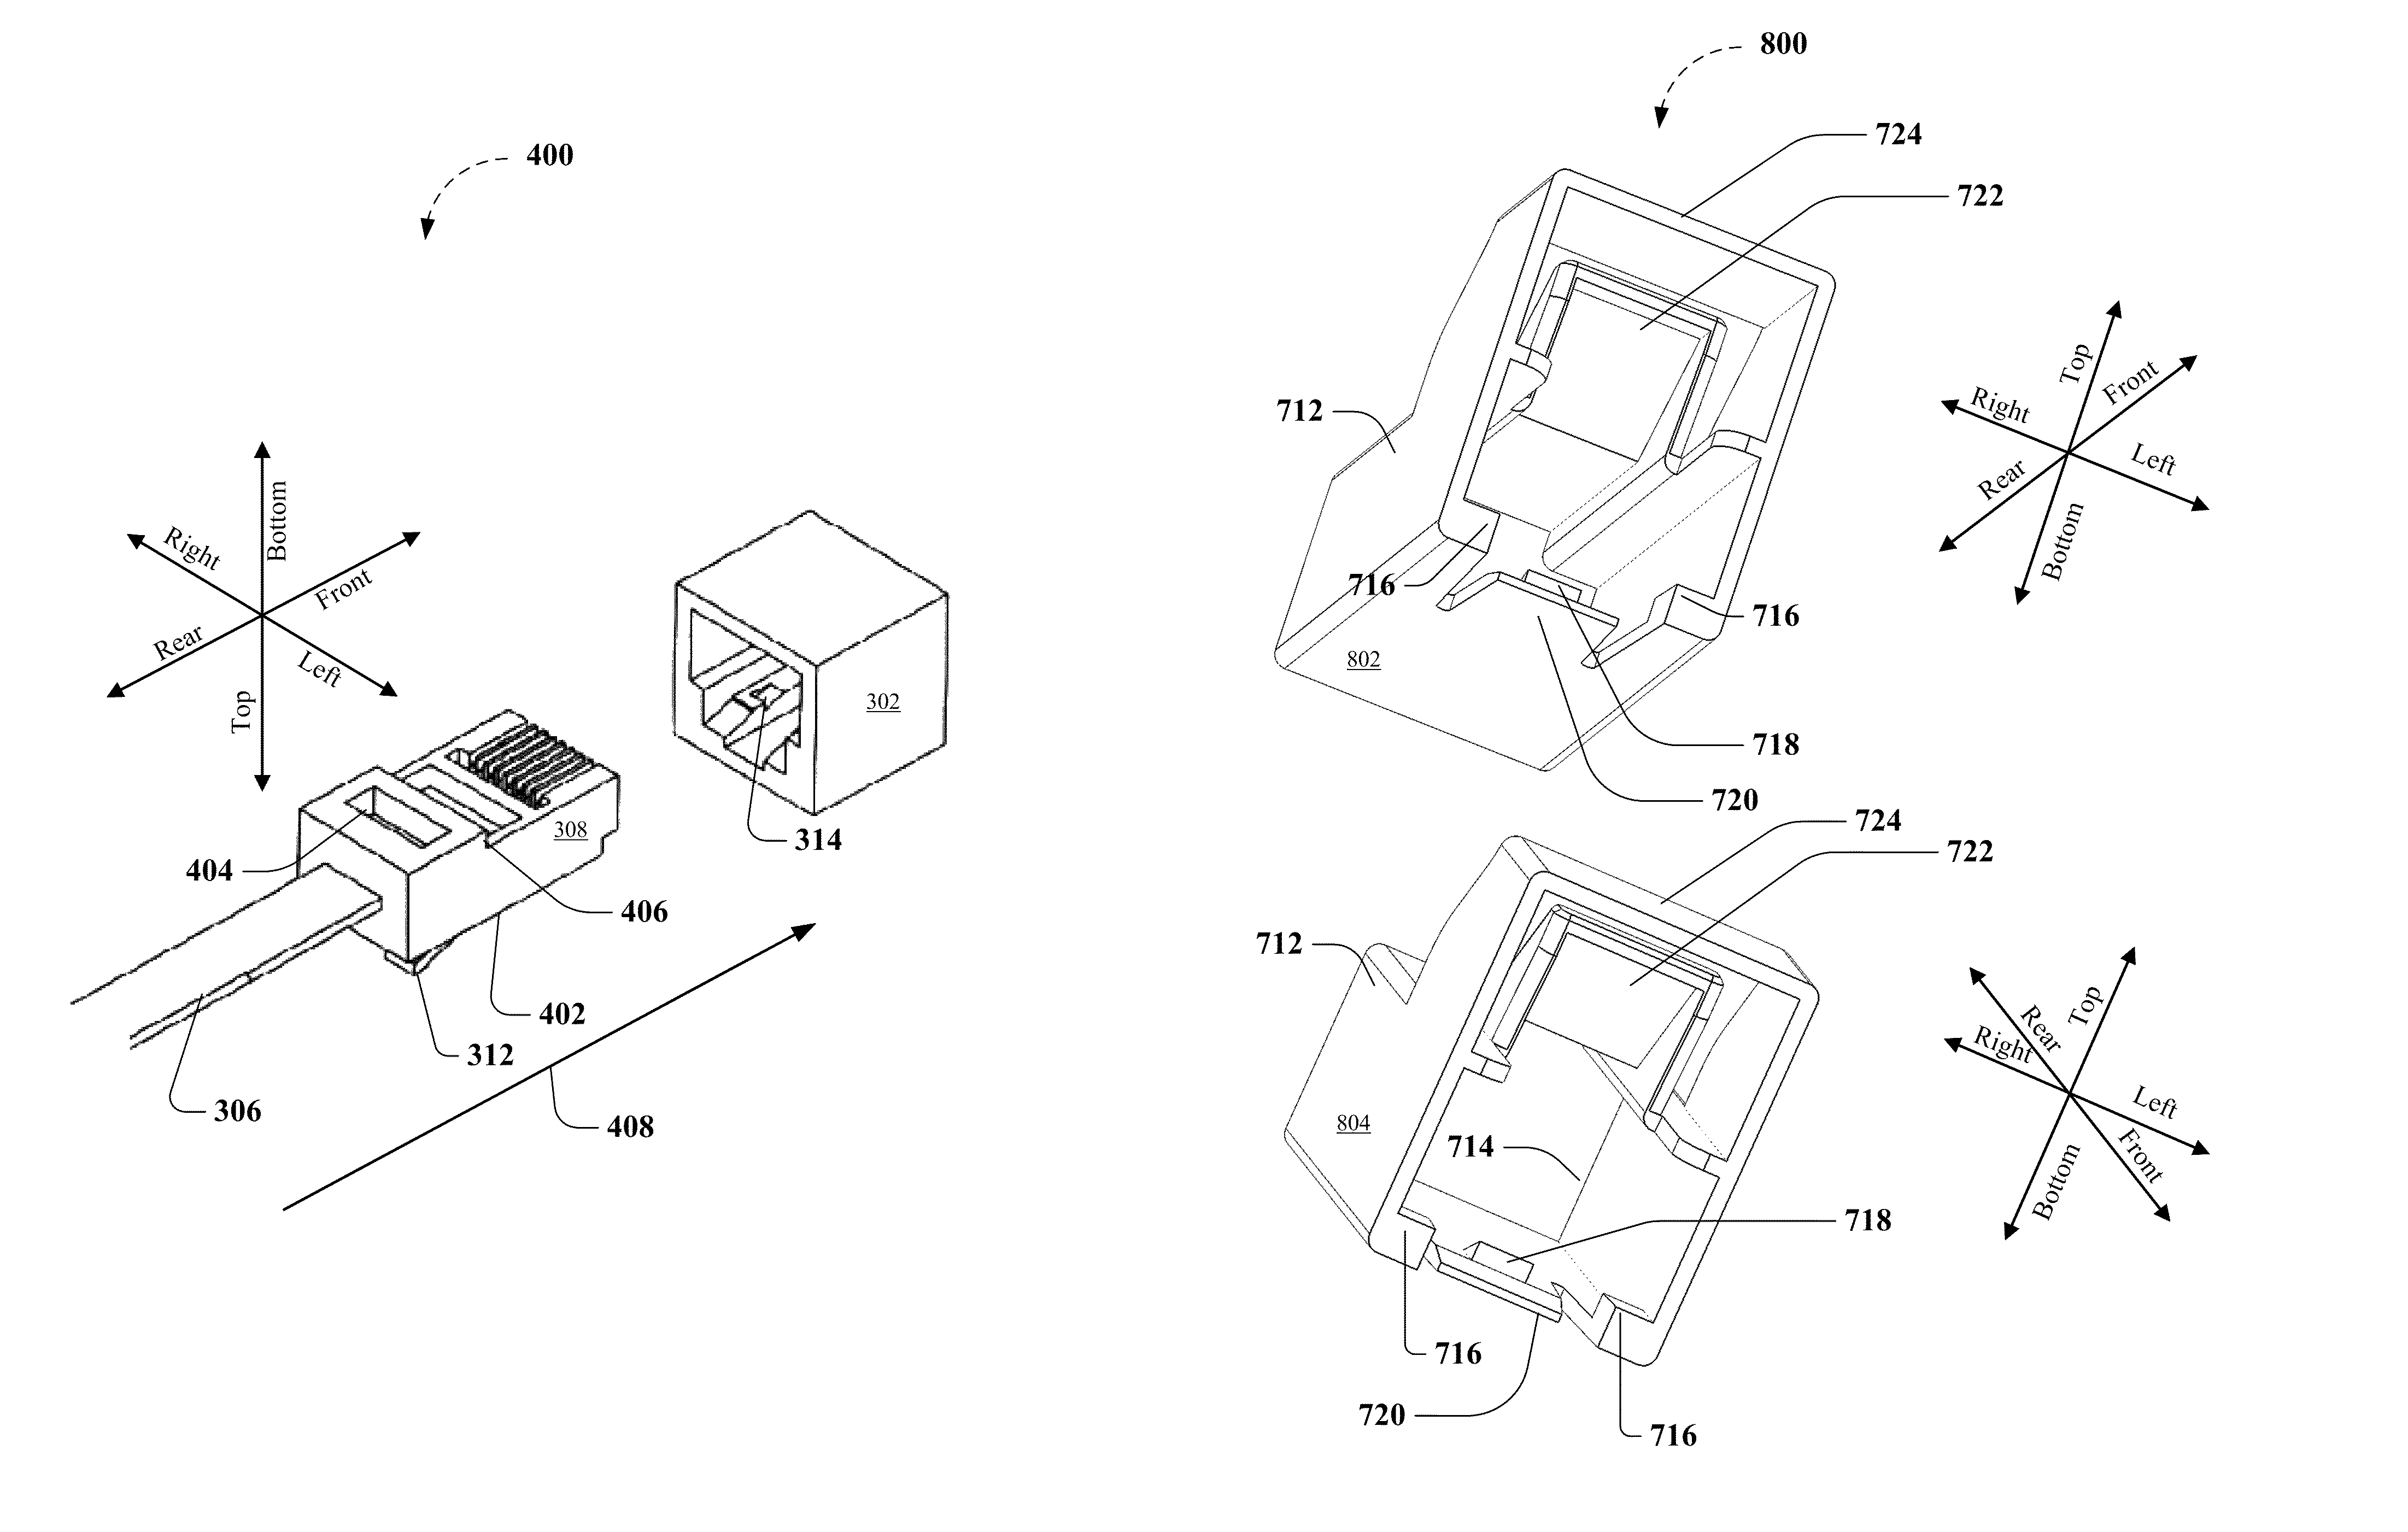 Tamper prevention system having a shroud to partially cover a release mechanism